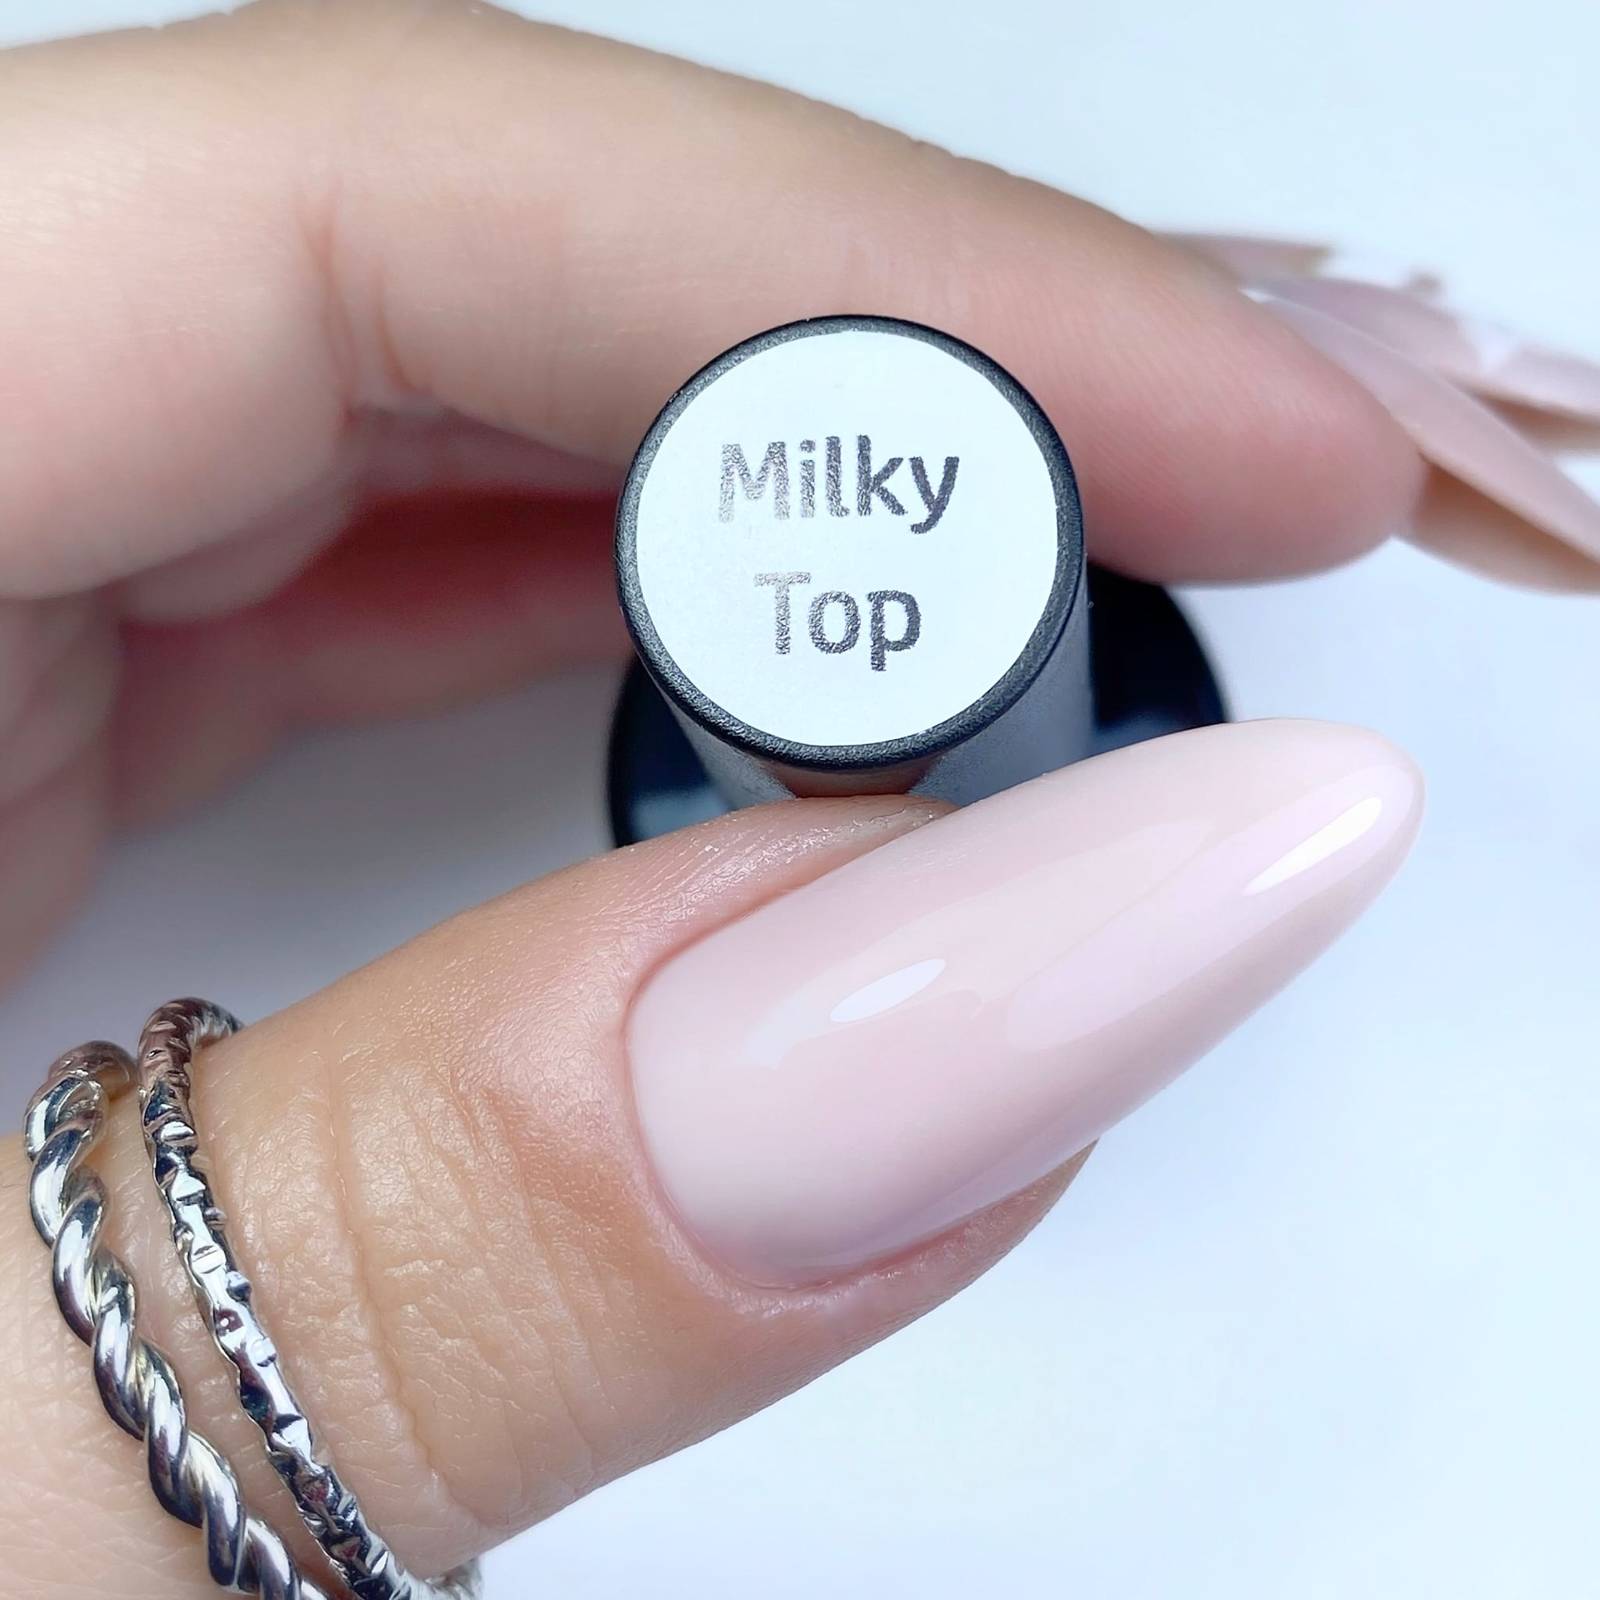 eng_pl_Top-Milky-8ml-no-wipe-855_2